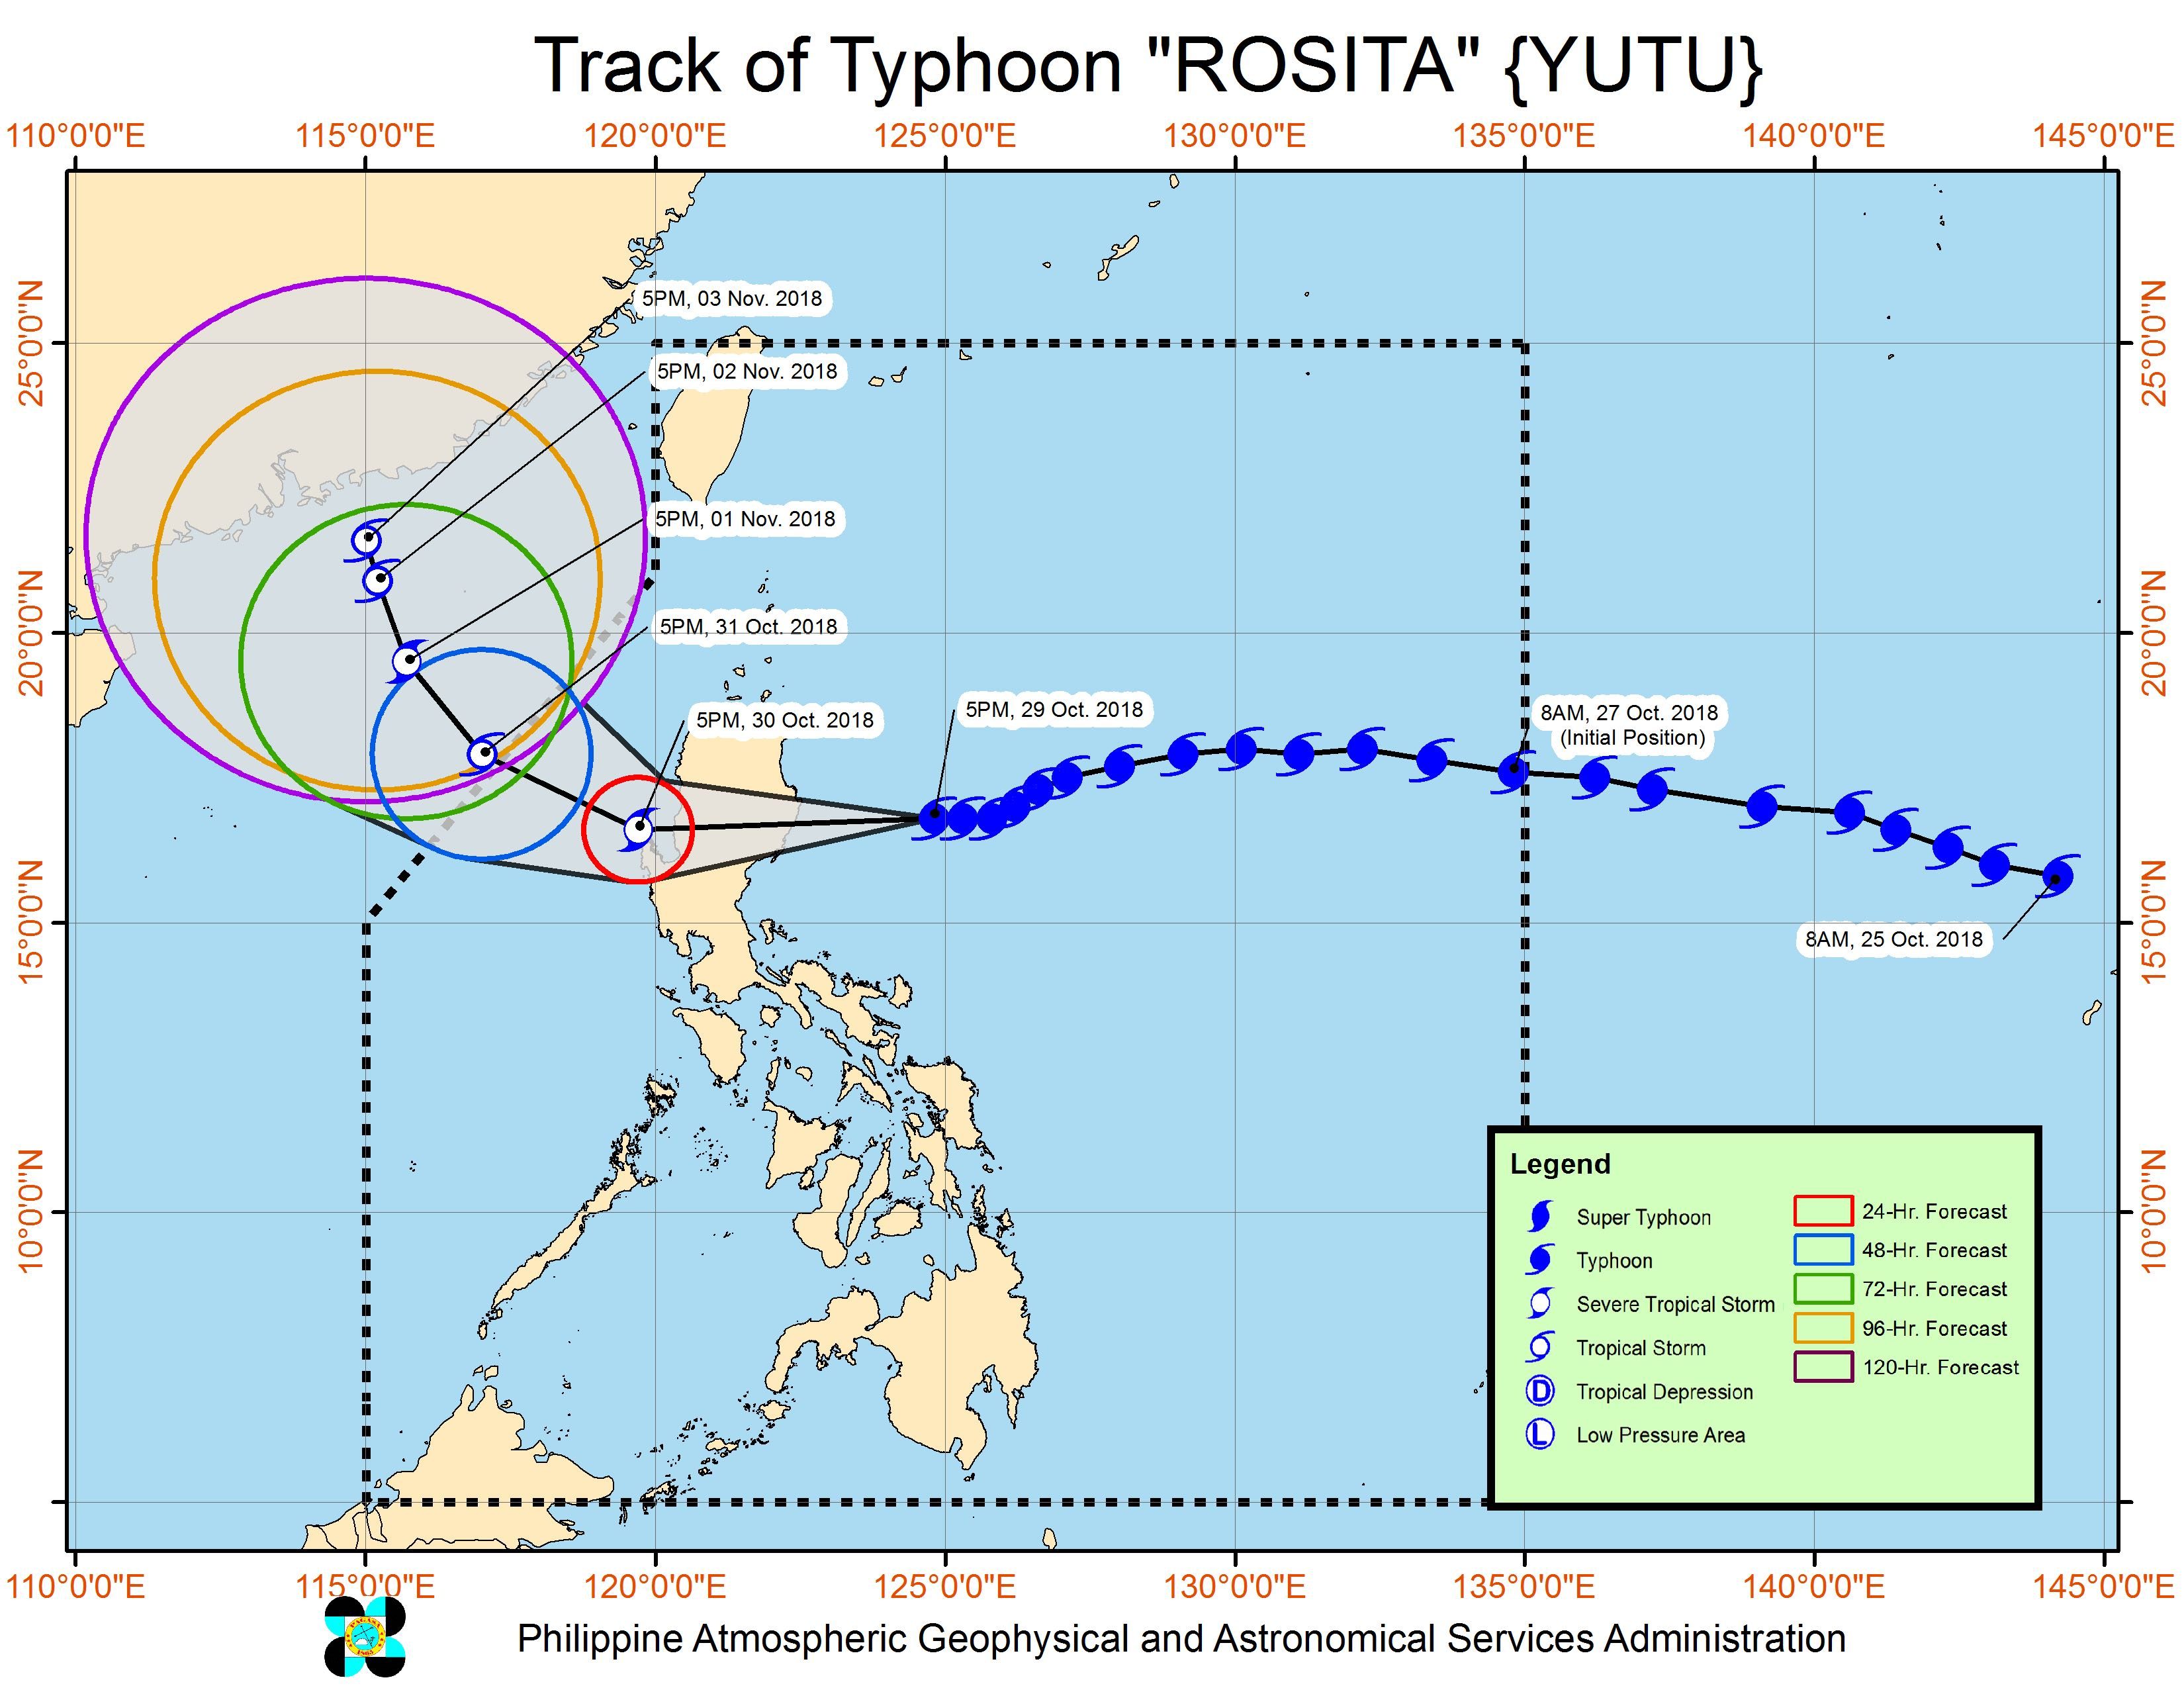 Forecast track of Typhoon Rosita (Yutu) as of October 29, 2018, 8 pm. Image from PAGASA 